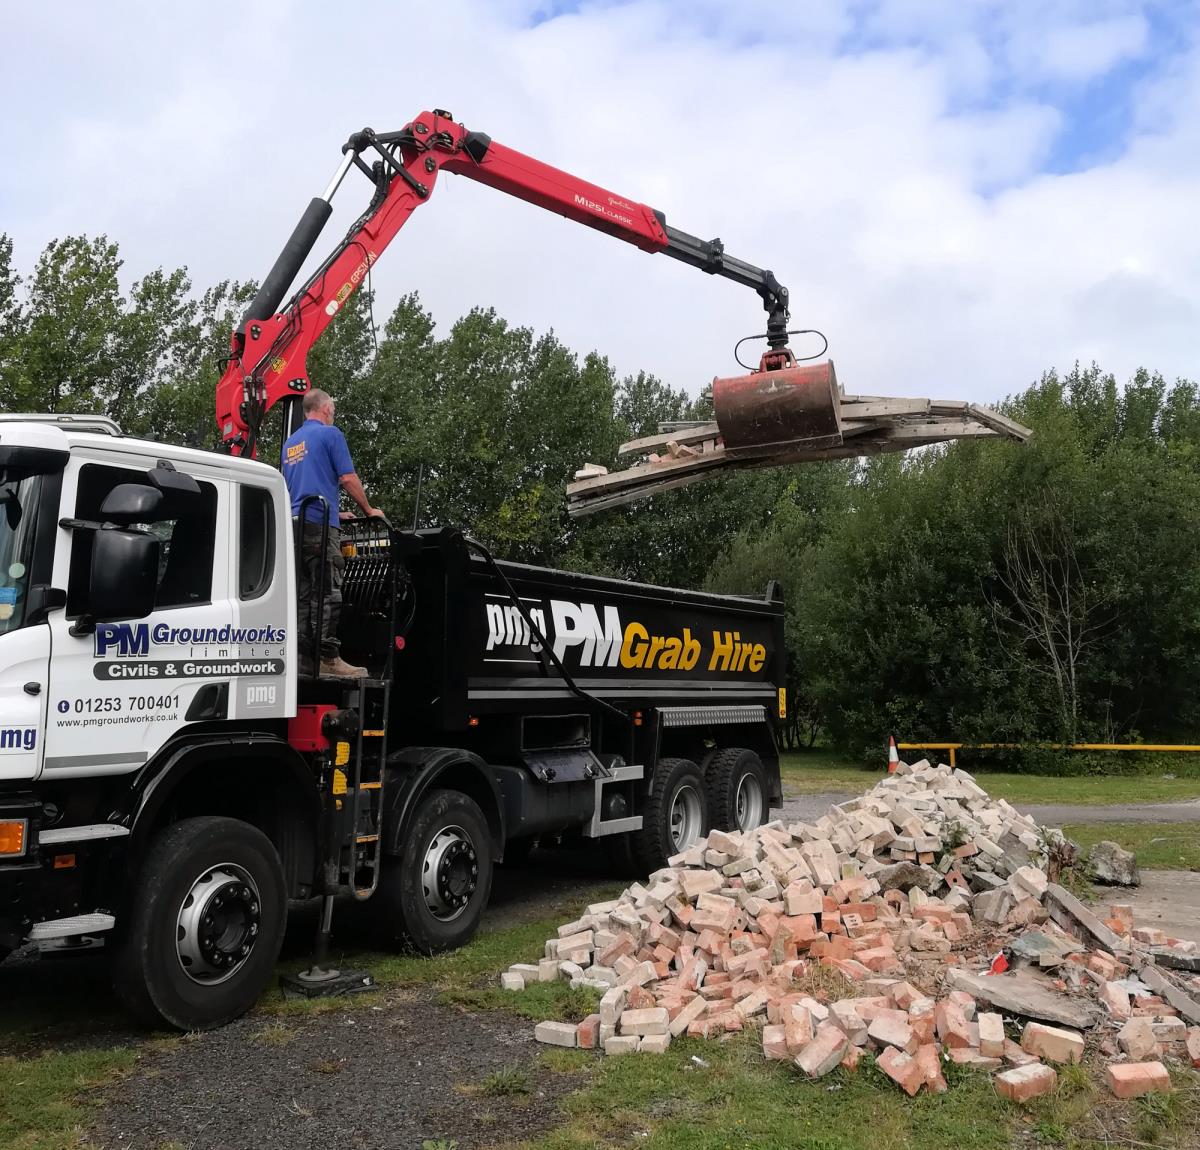 Removing lorry loads of rubble free of charge